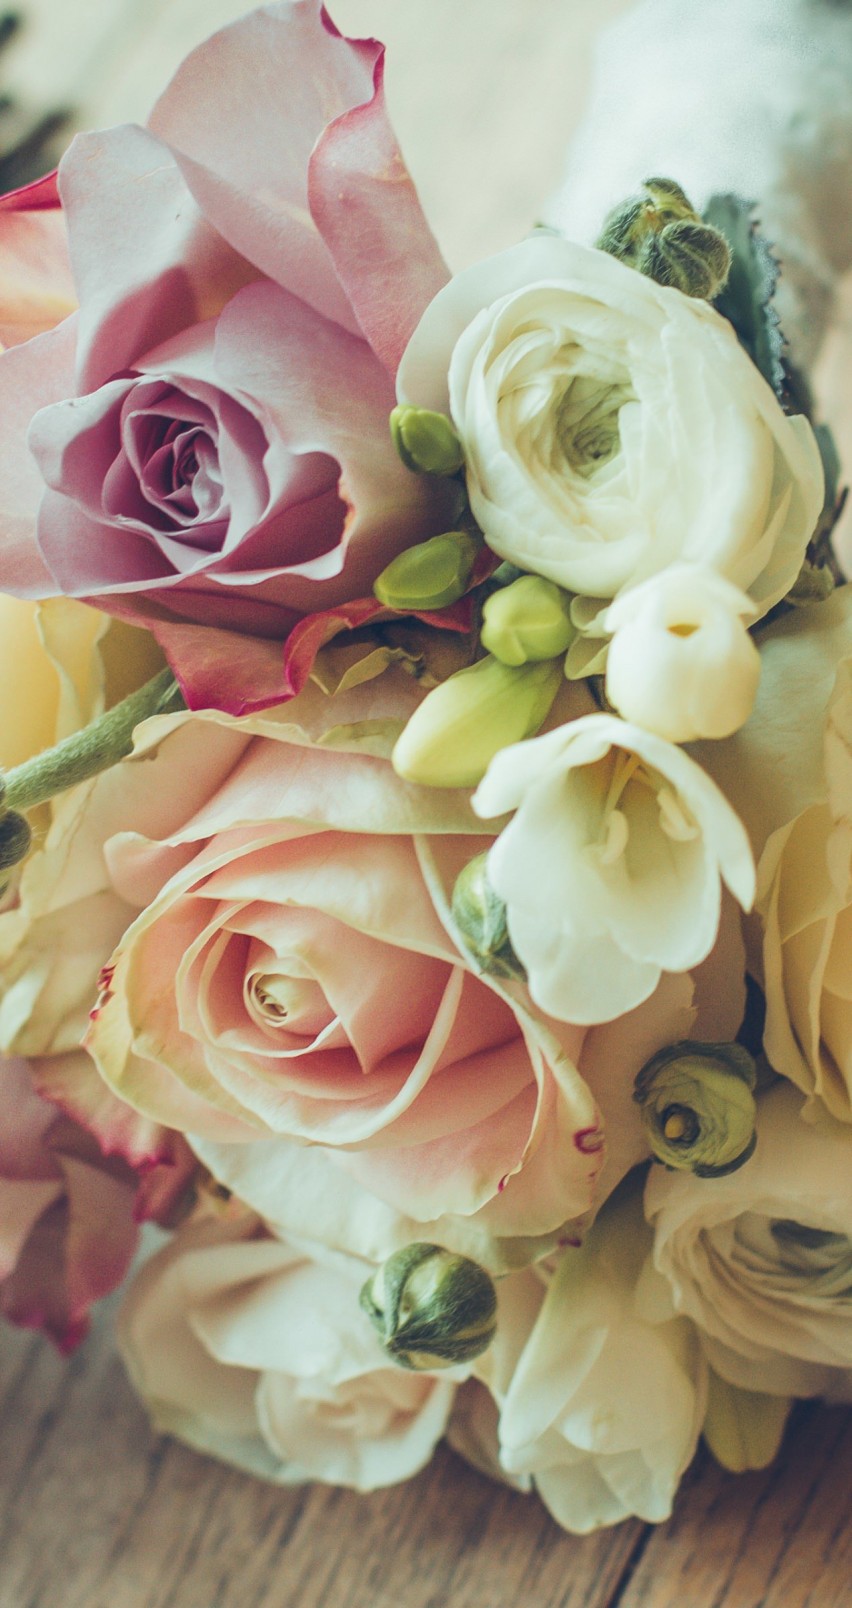 Roses Bouquet Composition Wallpaper for Apple iPhone 6 / 6s